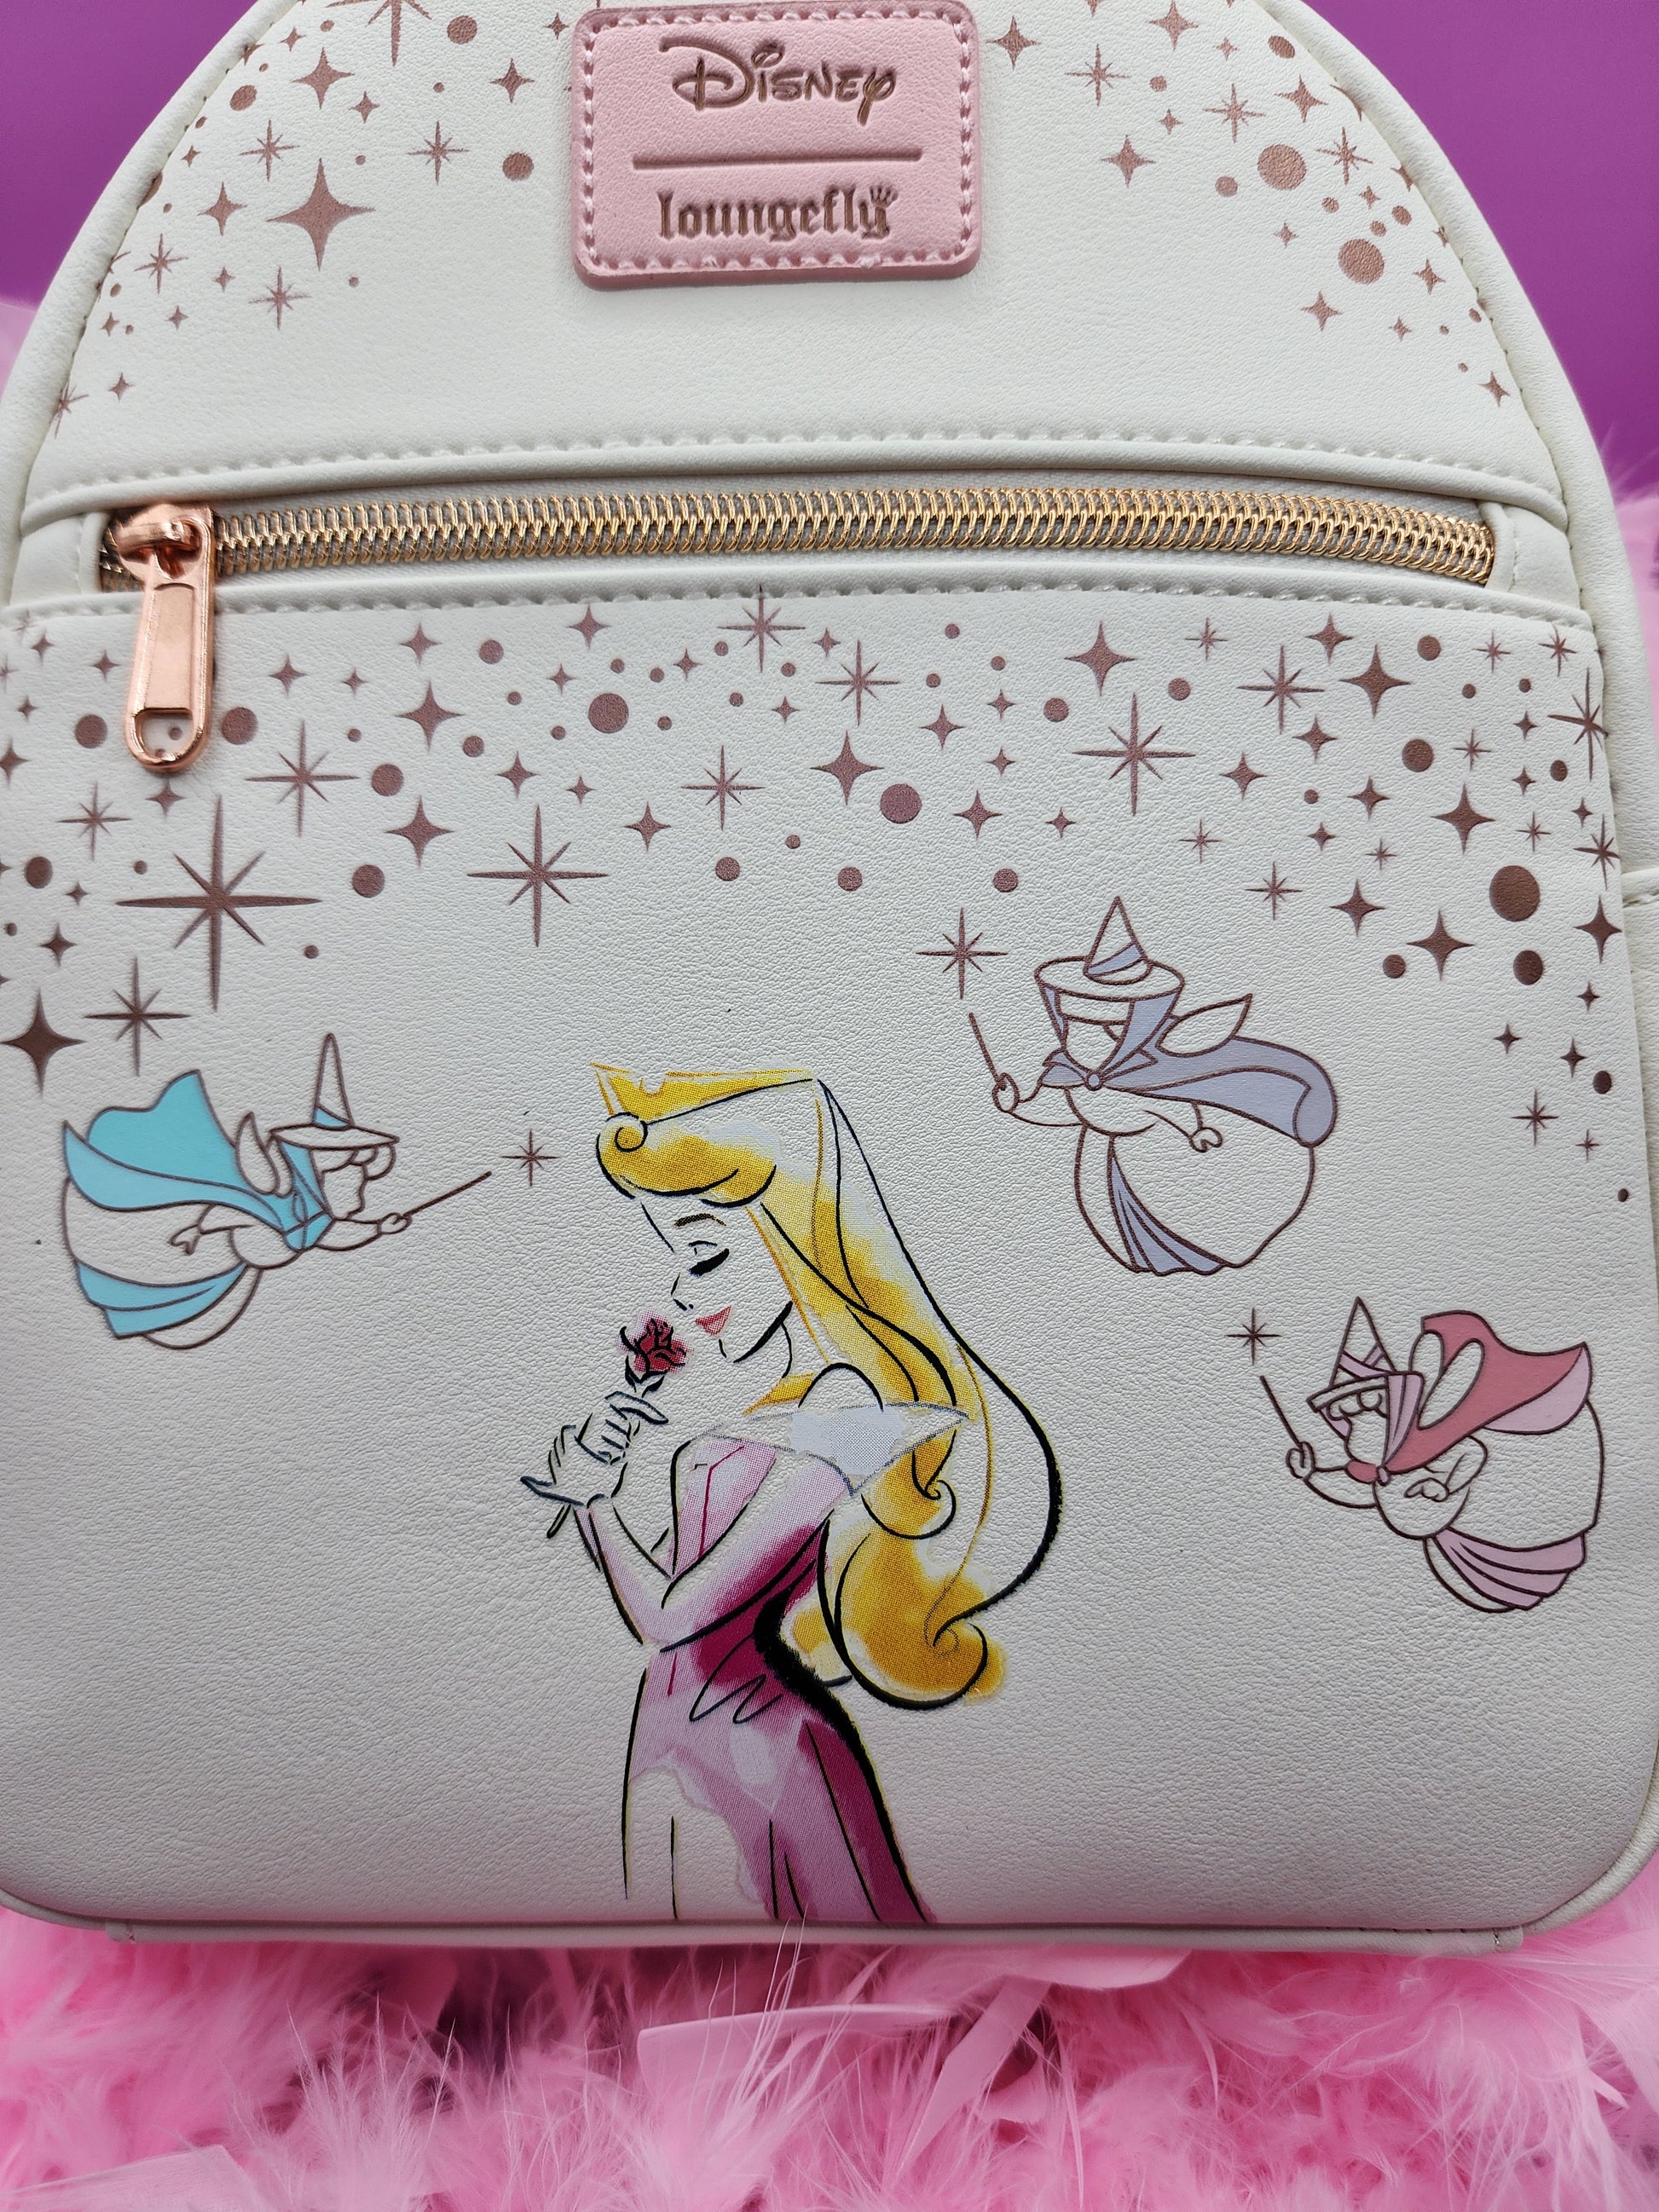 Loungefly Disney Sleeping Beauty and the 3 Fairies Backpack